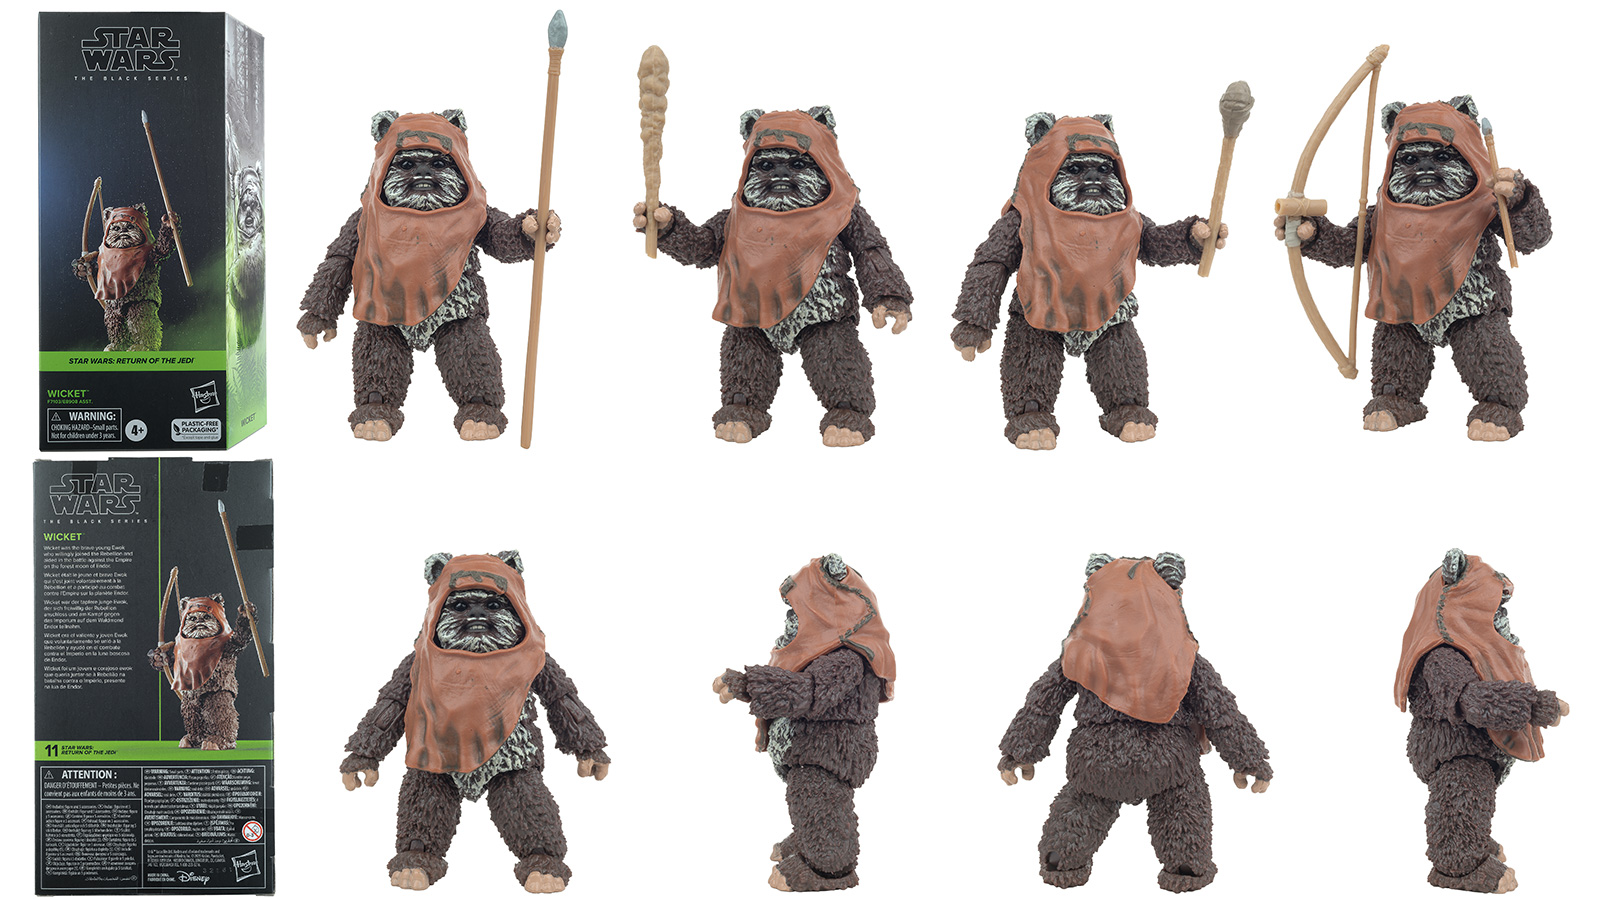 New Photos - The Black Series 6-Inch 11: Wicket